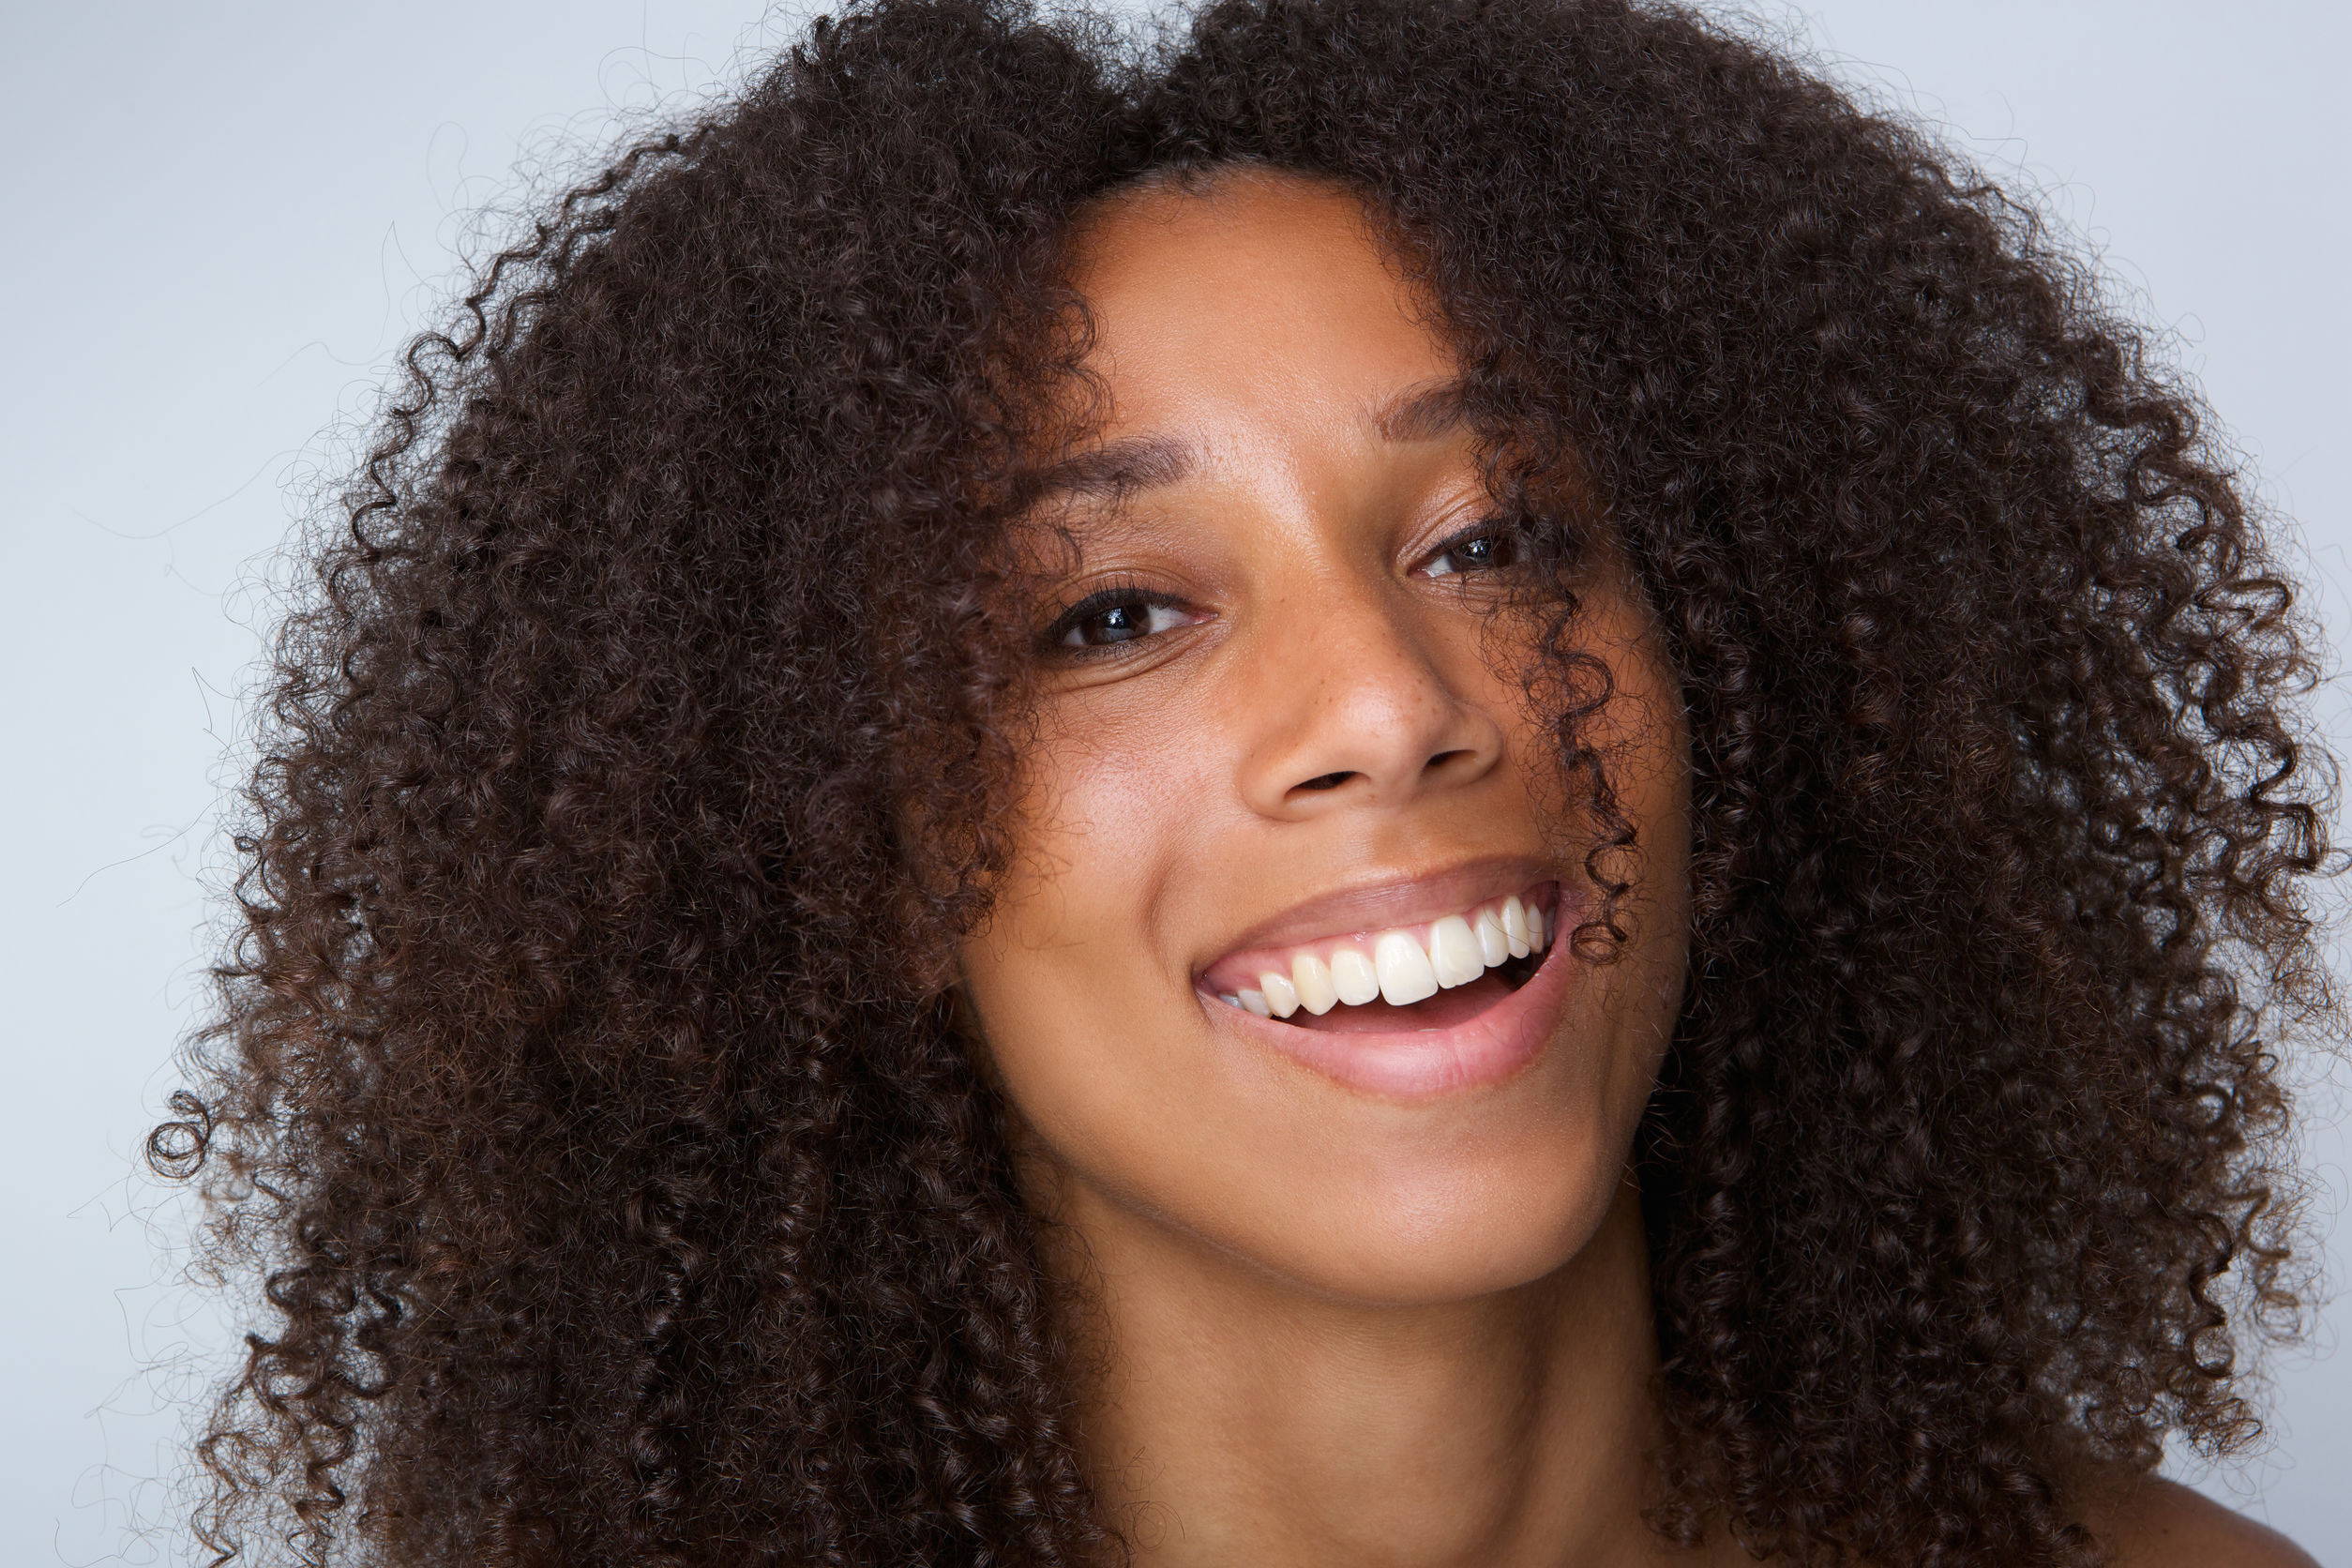 What Makes Curly Hair Curly?